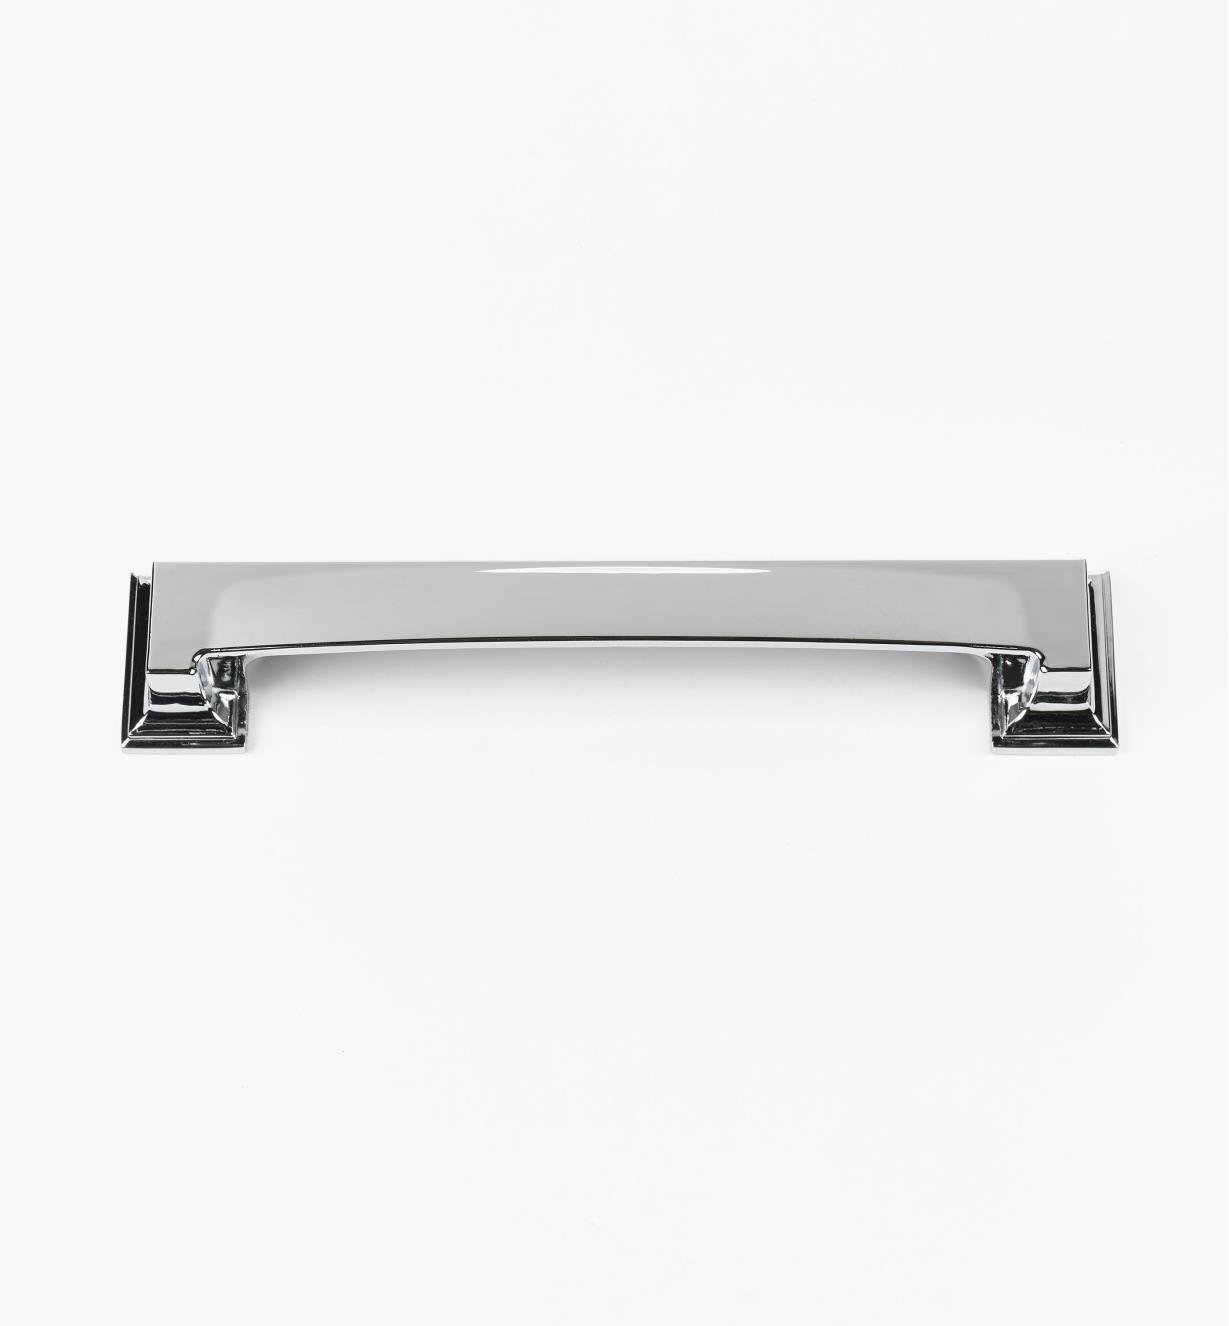 02A2547 - 126mm/160mm Polished Chrome Appoint Cup Pull